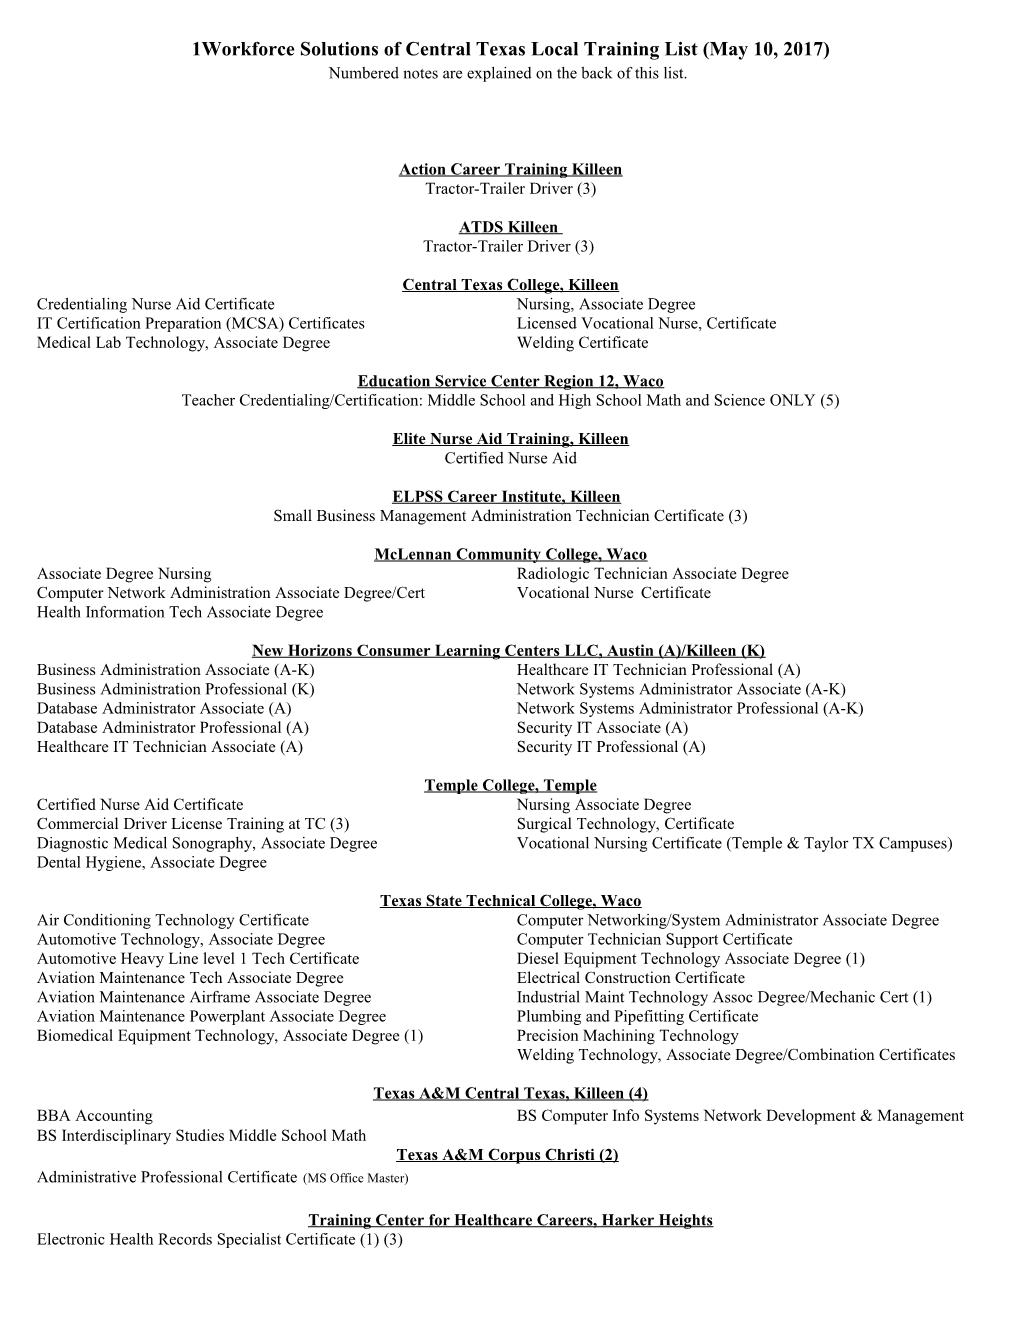 WORKFORCE INVESTMENT ACT (WIA) TRAINING LIST (November 28, 2001)